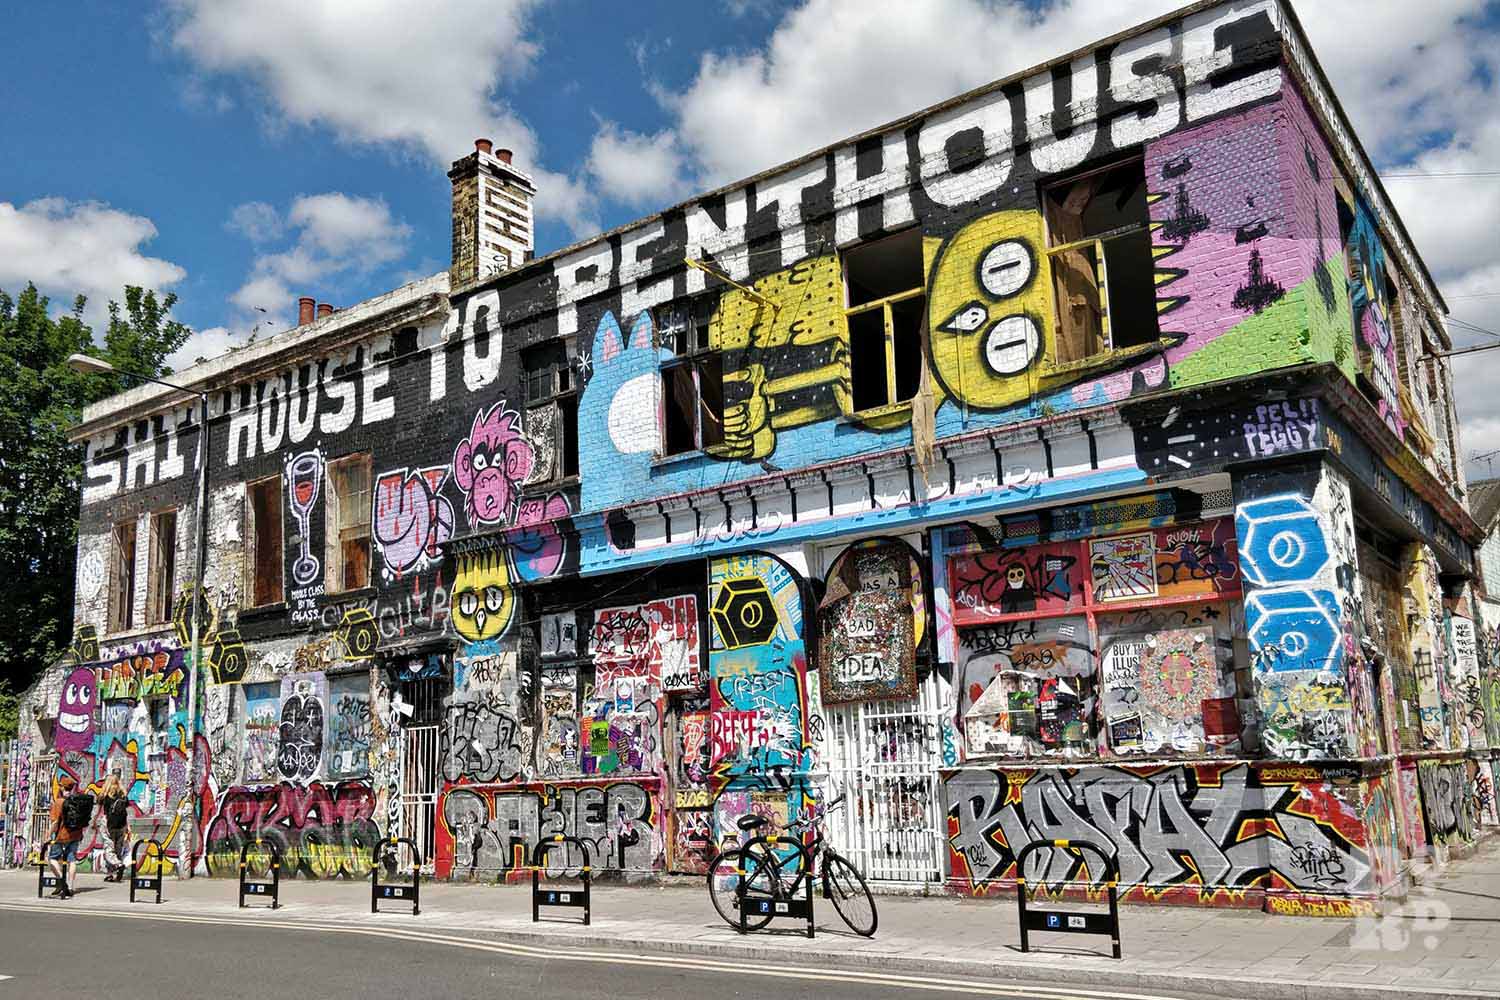 The Lord Napier's side in 2019 with 'shithouse to penthouse' prominent